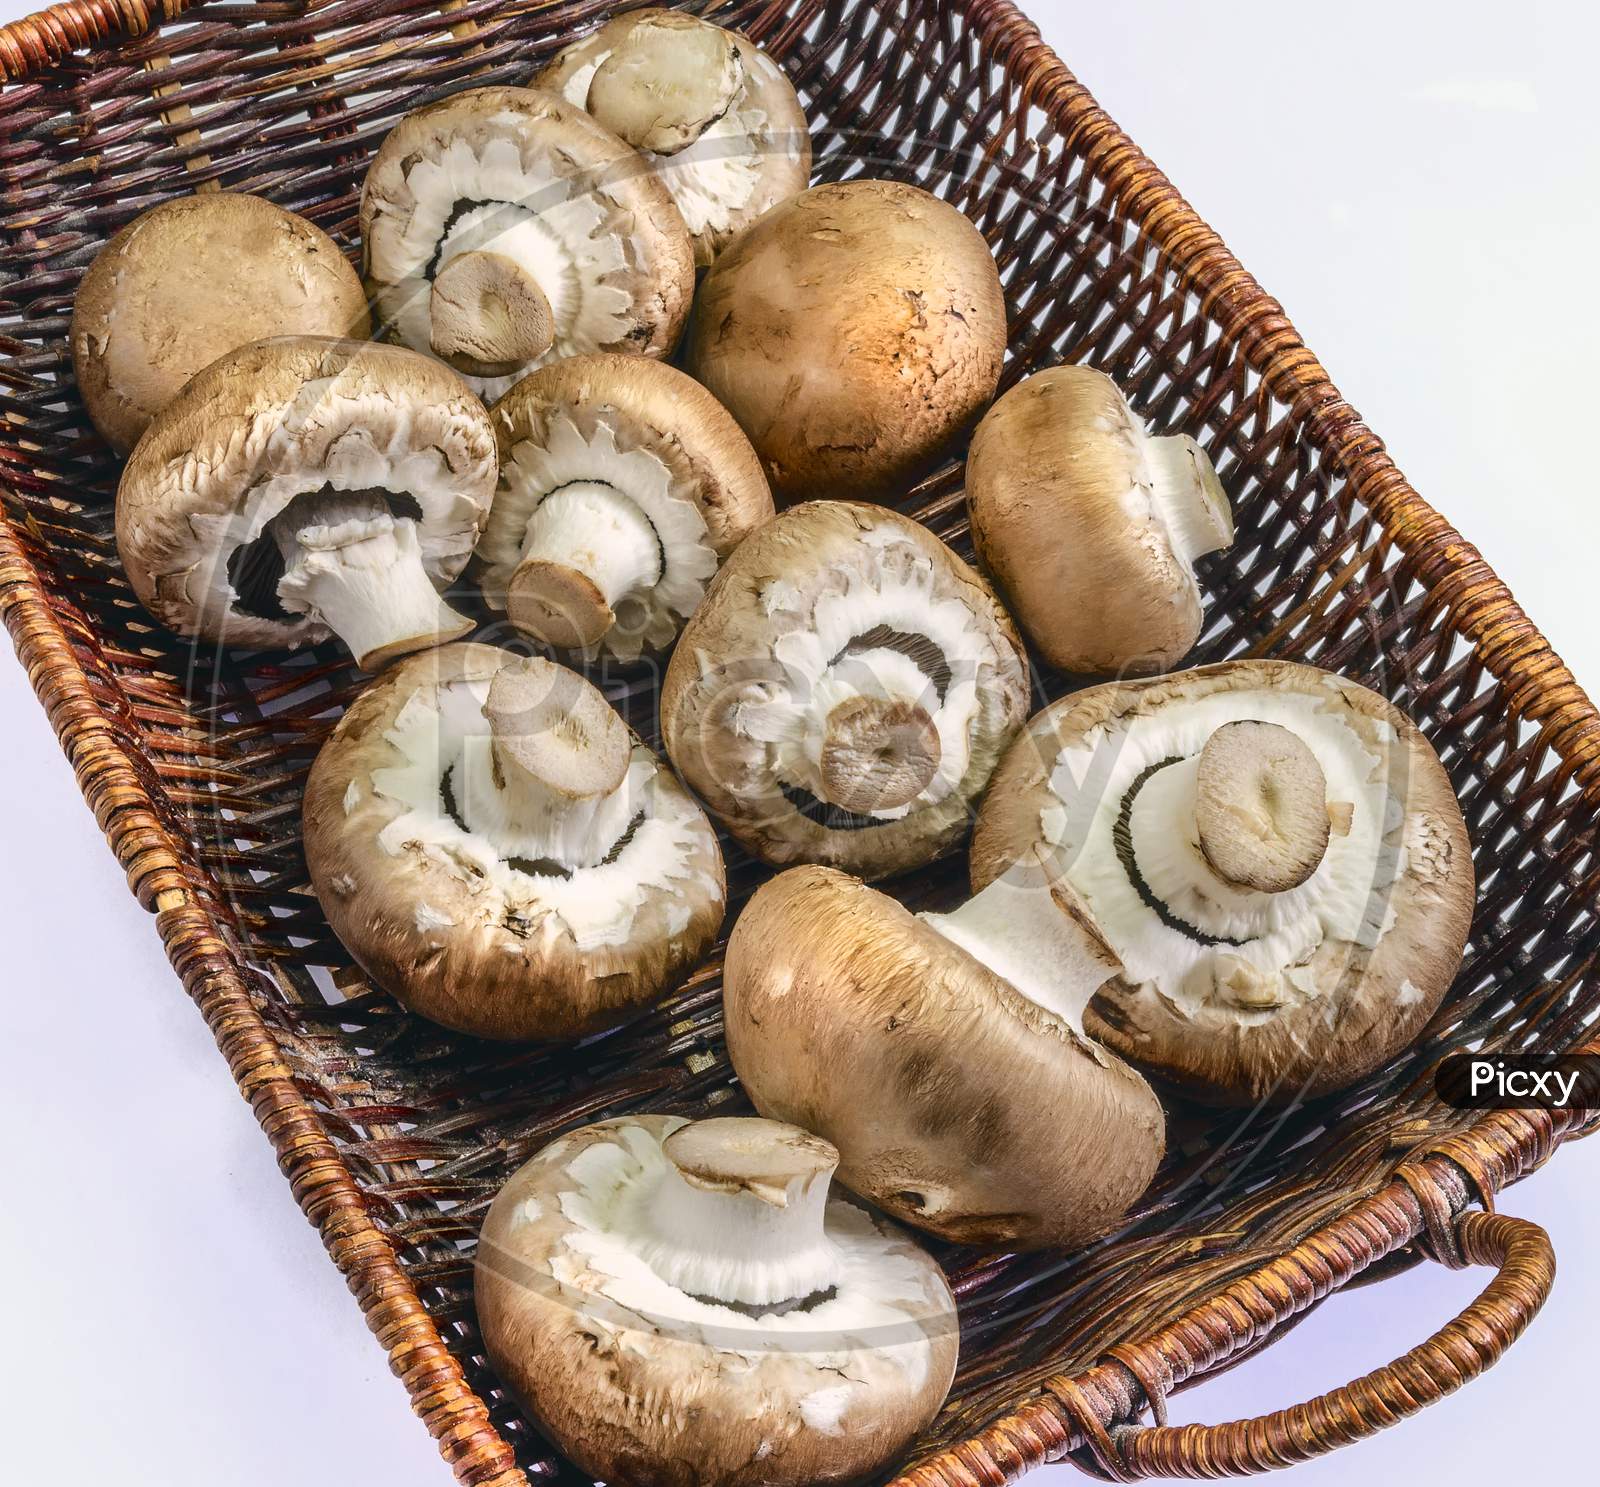 A collection of cremini mushrooms in a basket